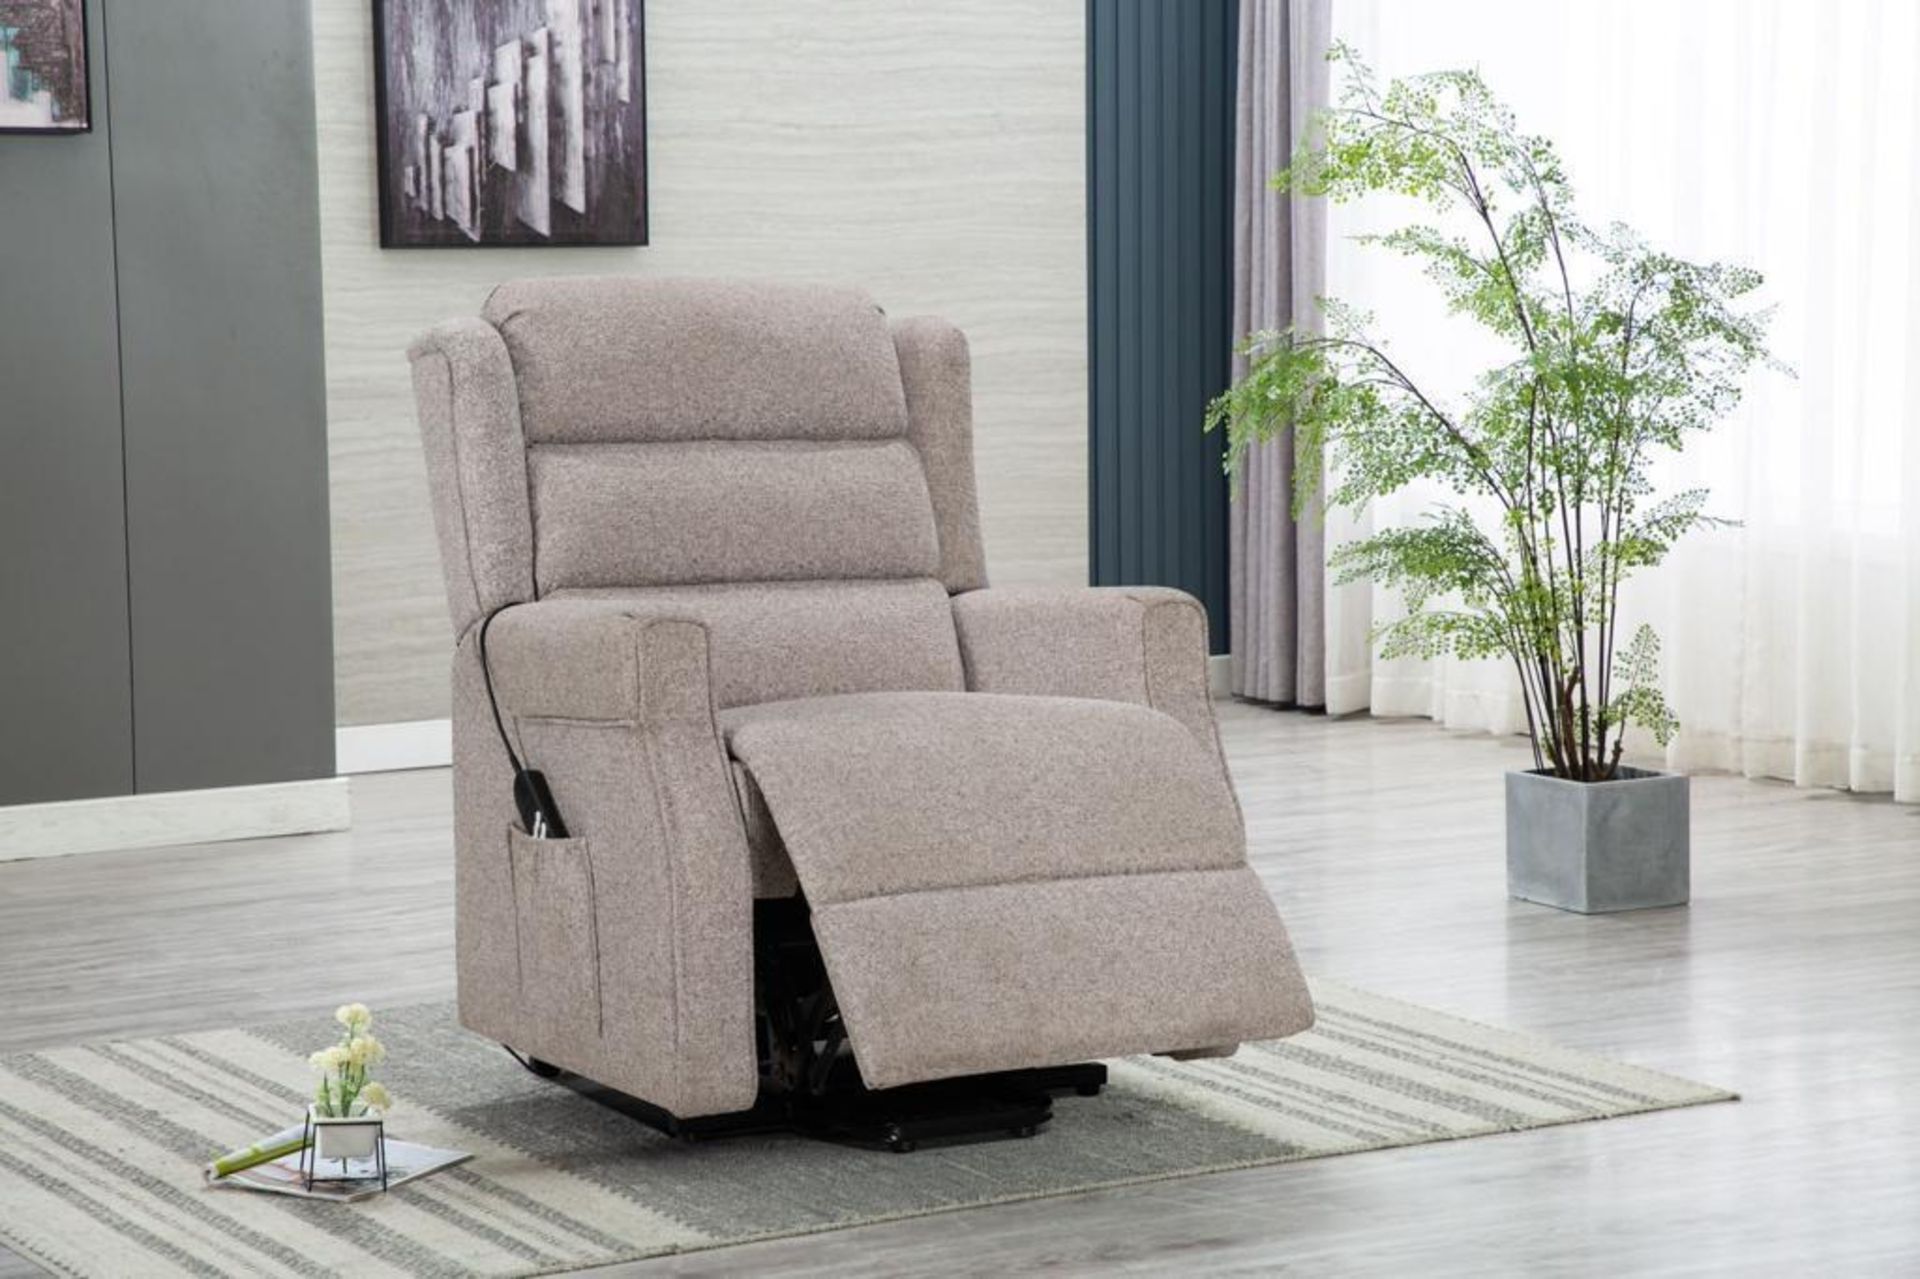 BRAND NEW & BOXED Malaga electric rise and recliner chair in Natural.